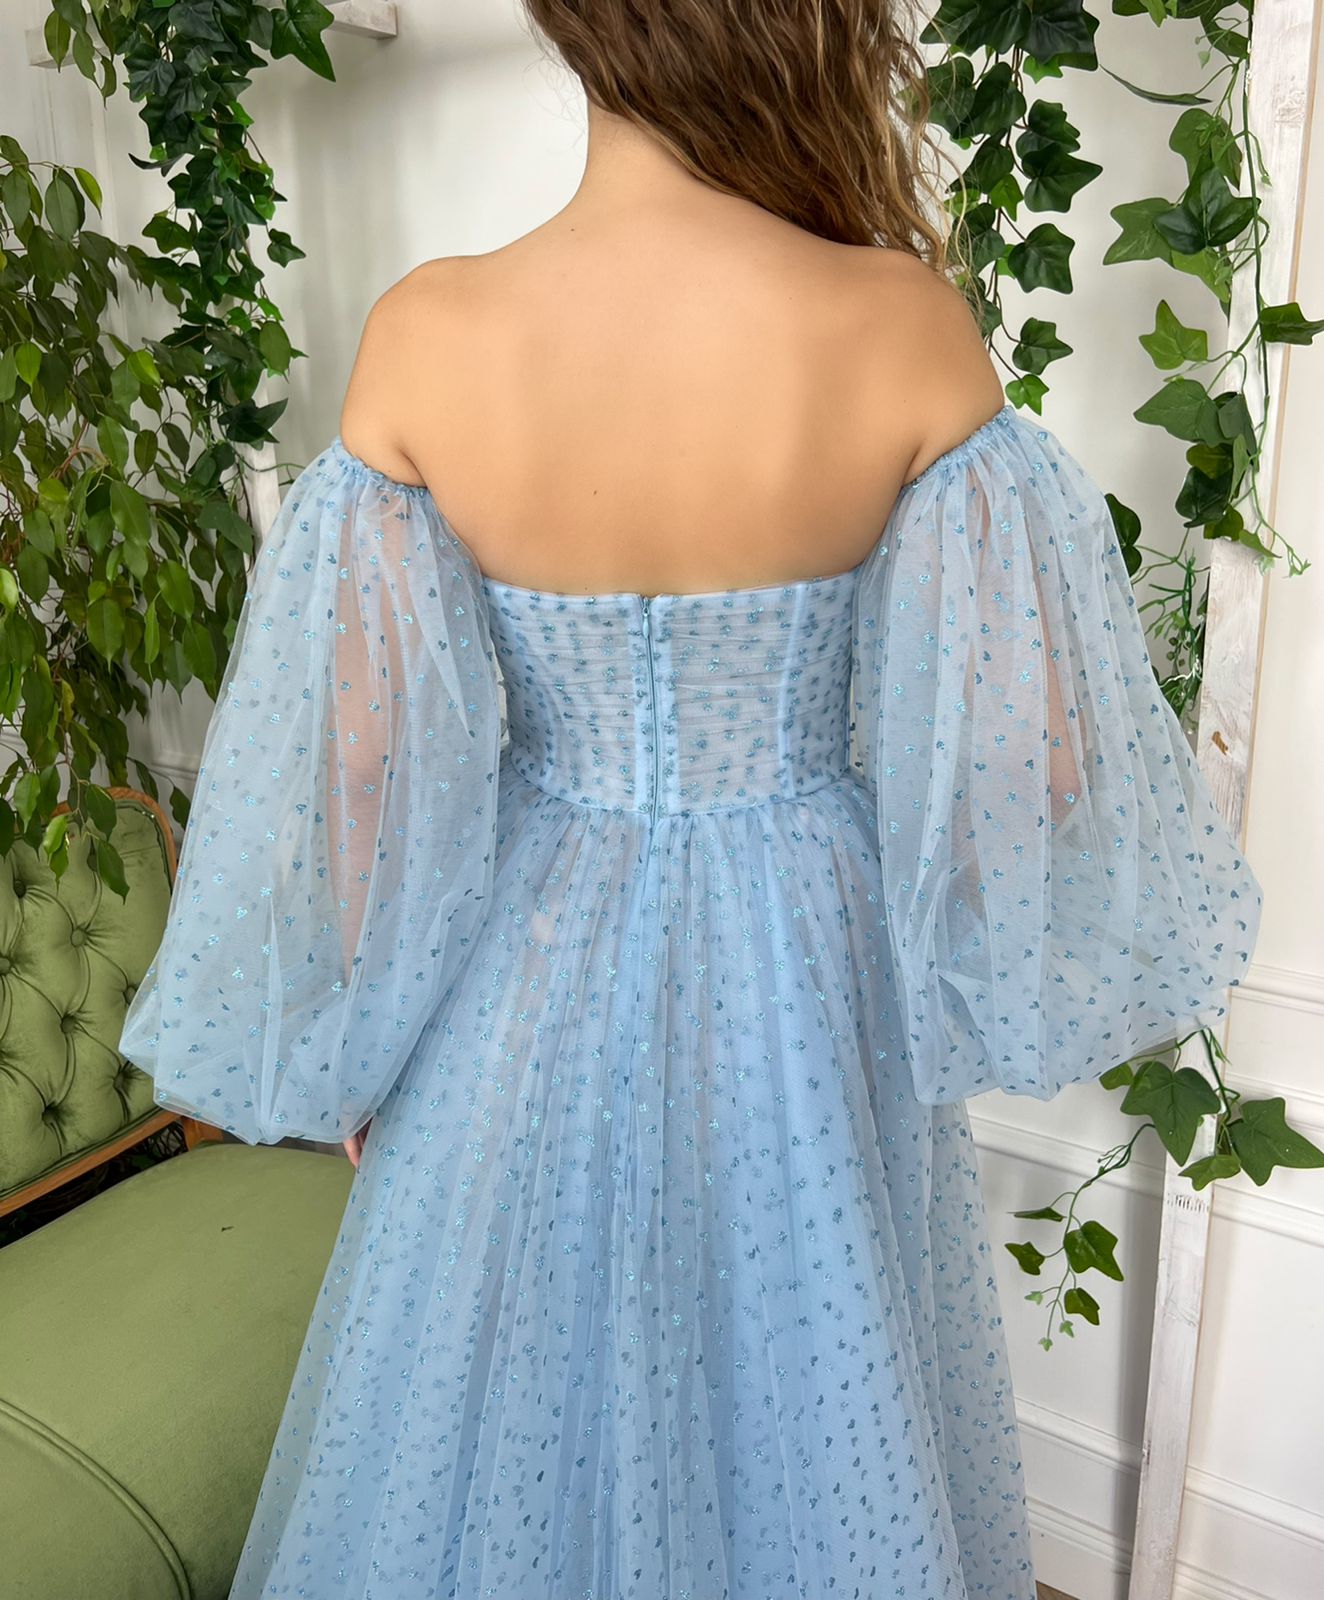 Blue A-Line dress with long off the shoulder sleeves and hearty fabric